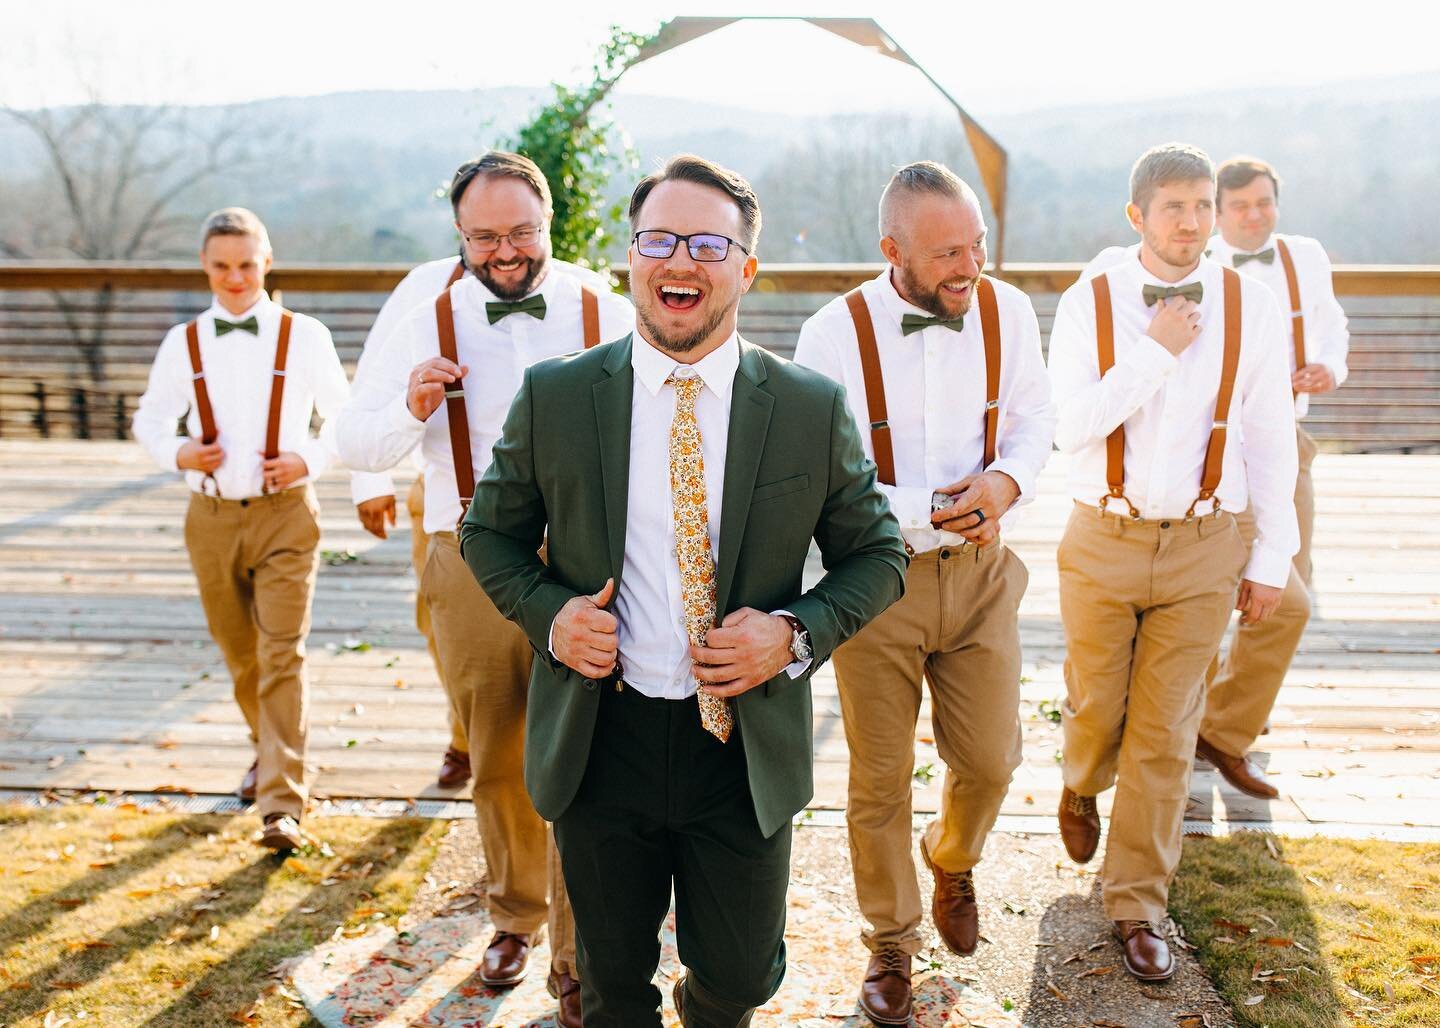 Oh boys just wanna have fun! Our grooms and their dudes get just as much special treatment as the brides and their girls. Did you know that in certain seasons of the year at Lewallen Farms you can book skeet shooting for the dudes? It always a good t